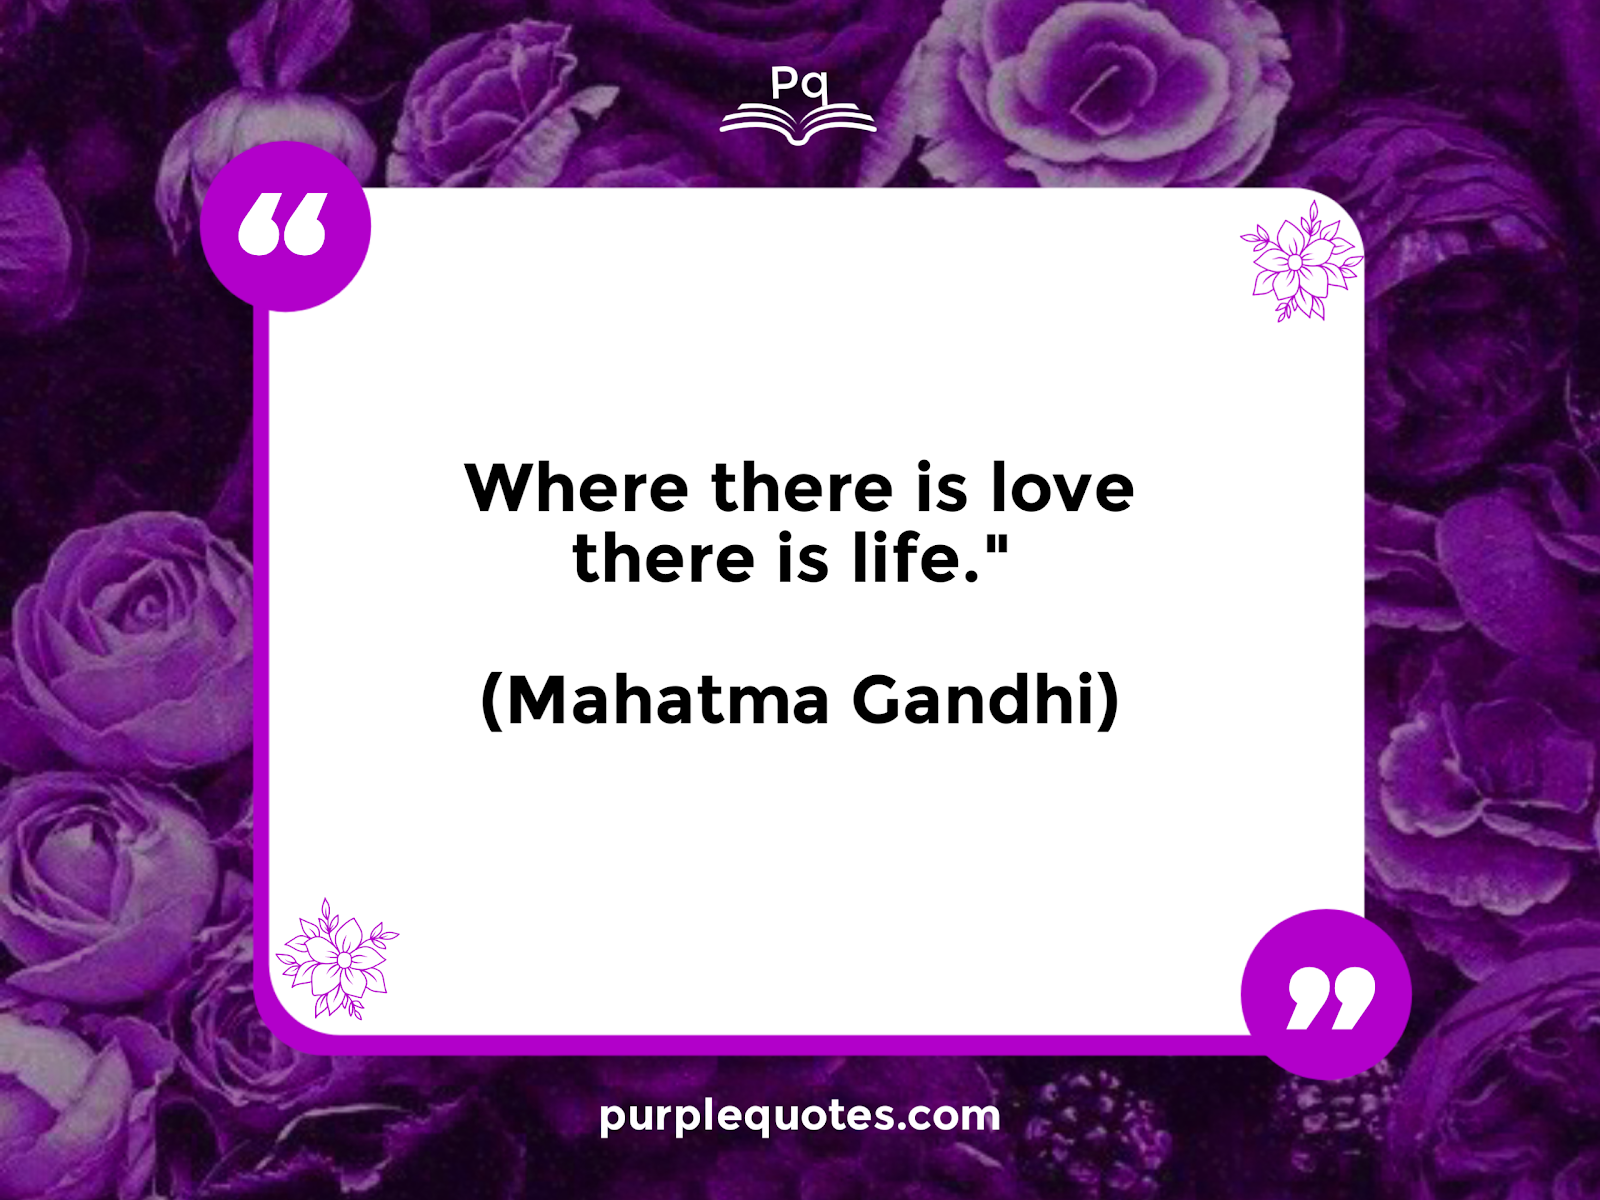 where there is love, there is life, quote by Mahatma Gandhi